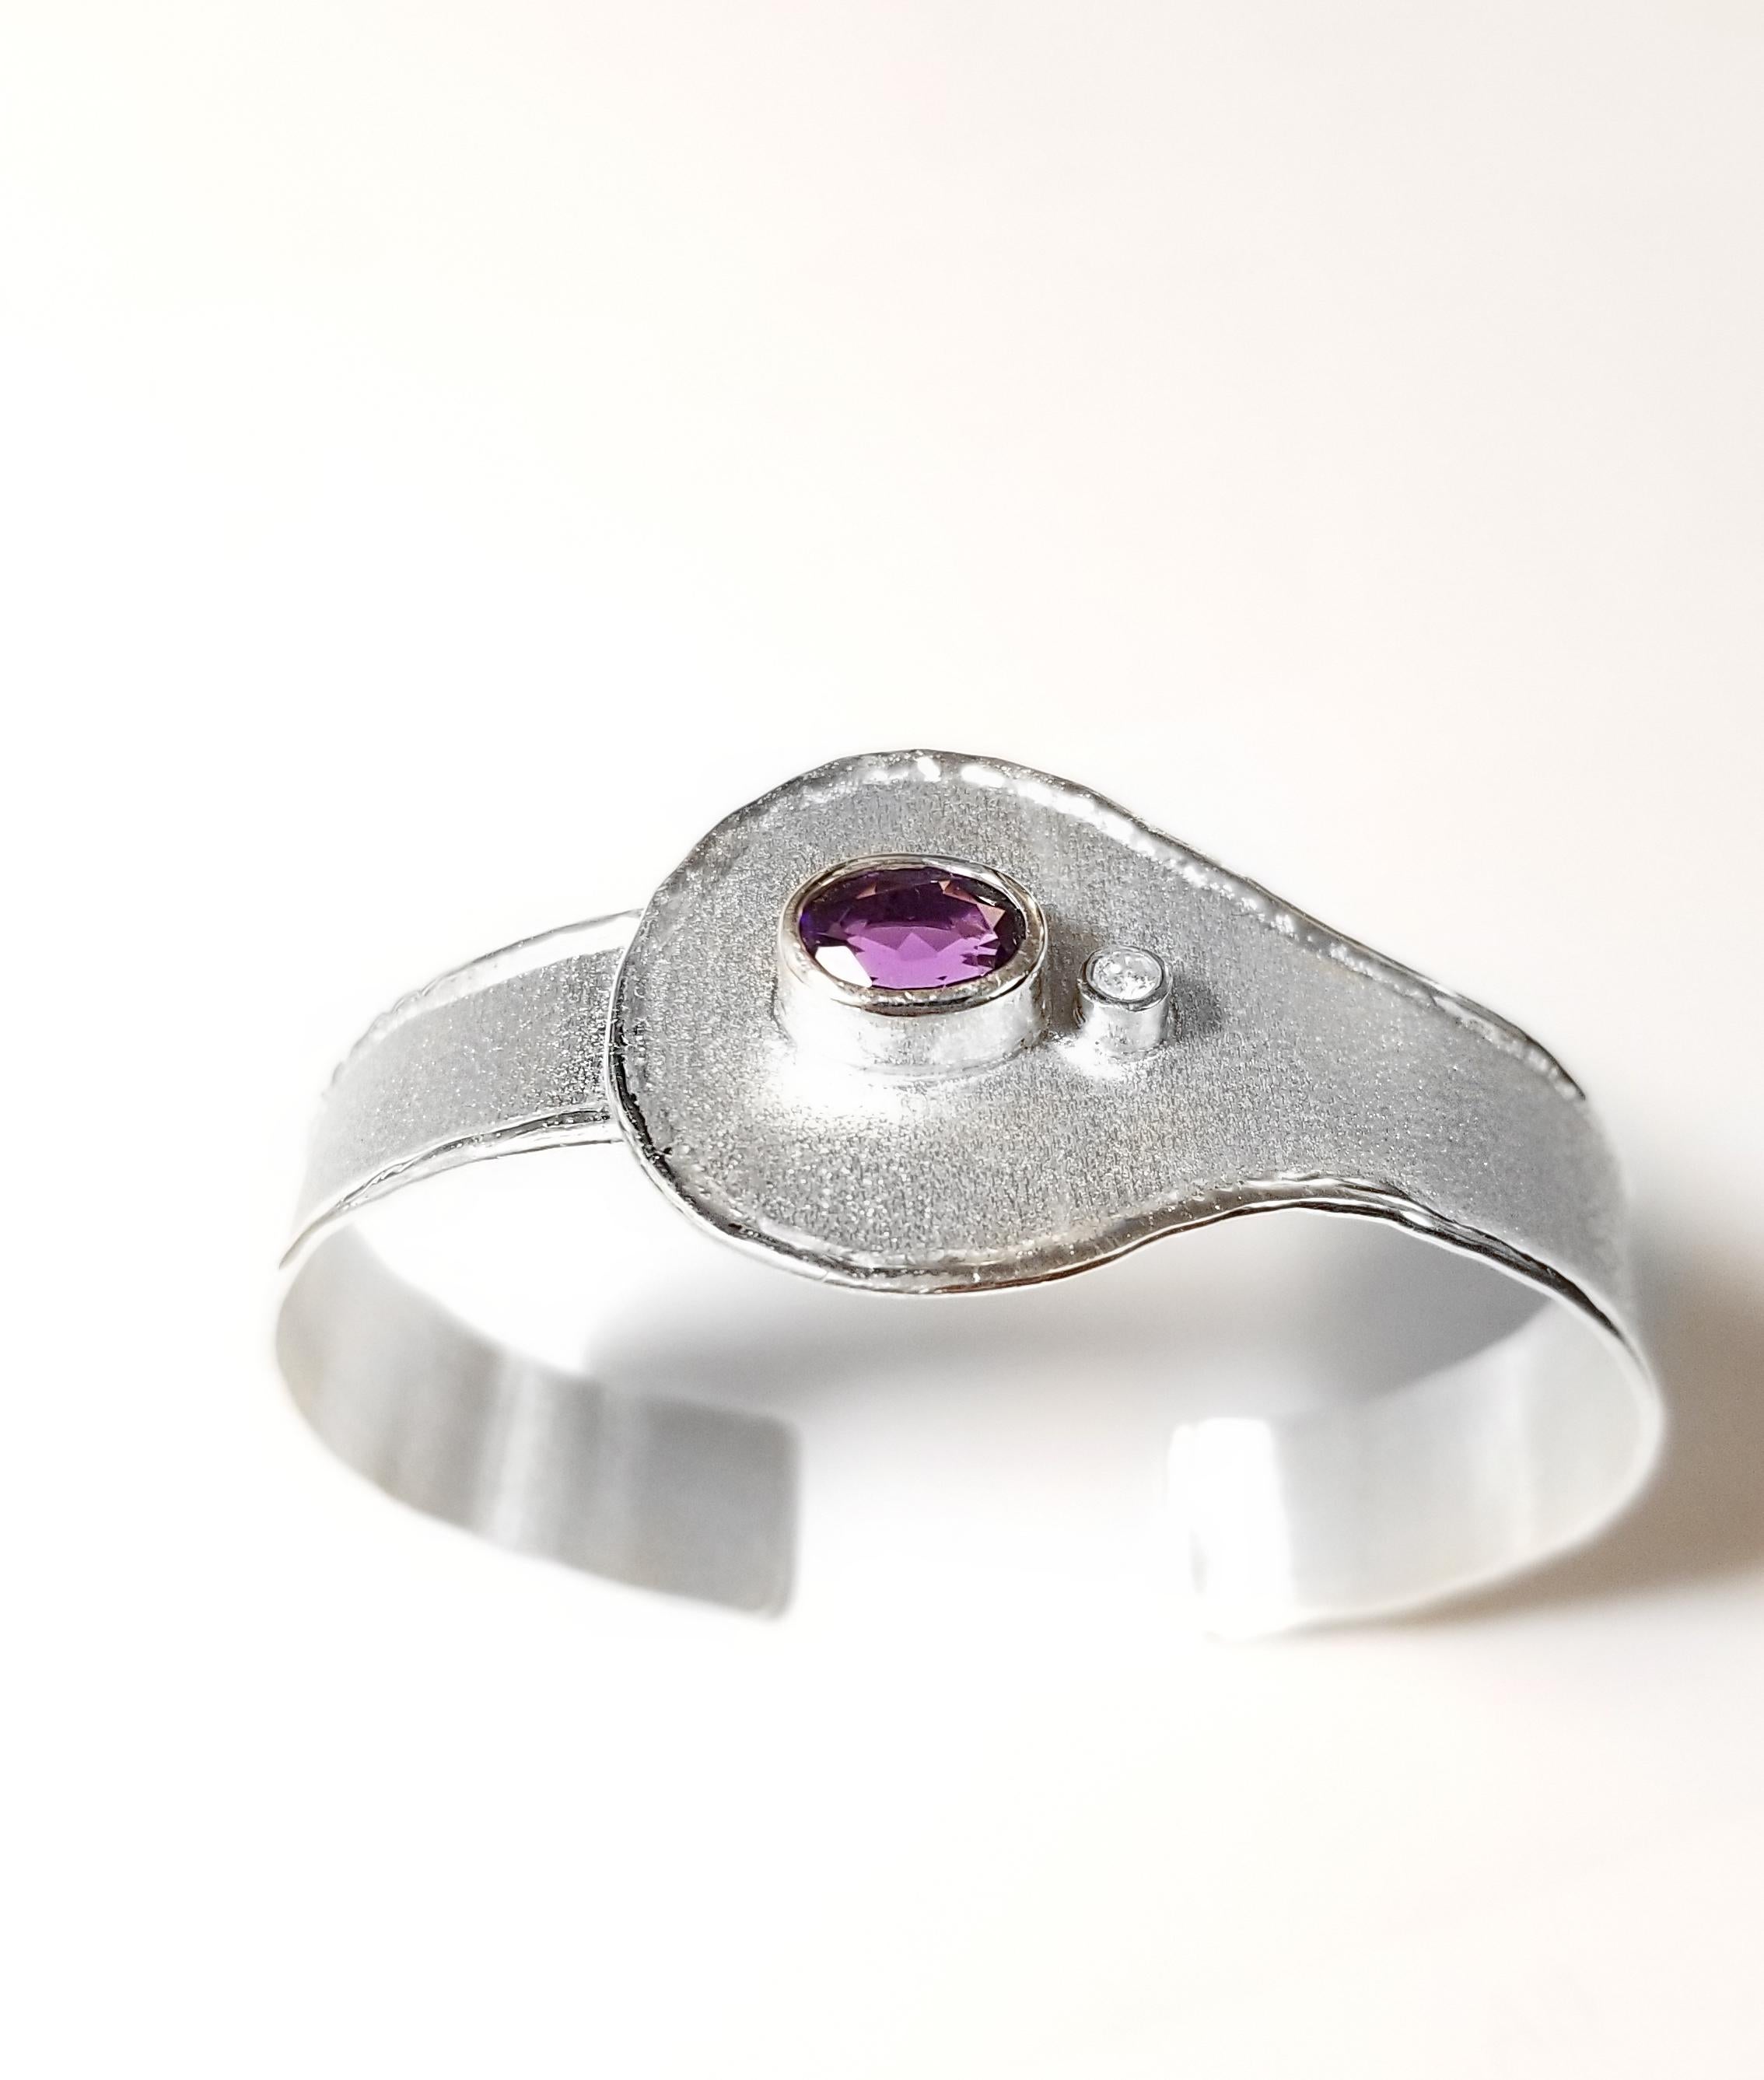 This is Yianni Creations all handmade artisan bangle bracelet from Ammos Collection crafted from Fine Silver in Greece. This adjustable bracelet features 1.75 Carat oval cut Amethyst accompanied by 0.03 Carat brilliant-cut diamond. The unique look